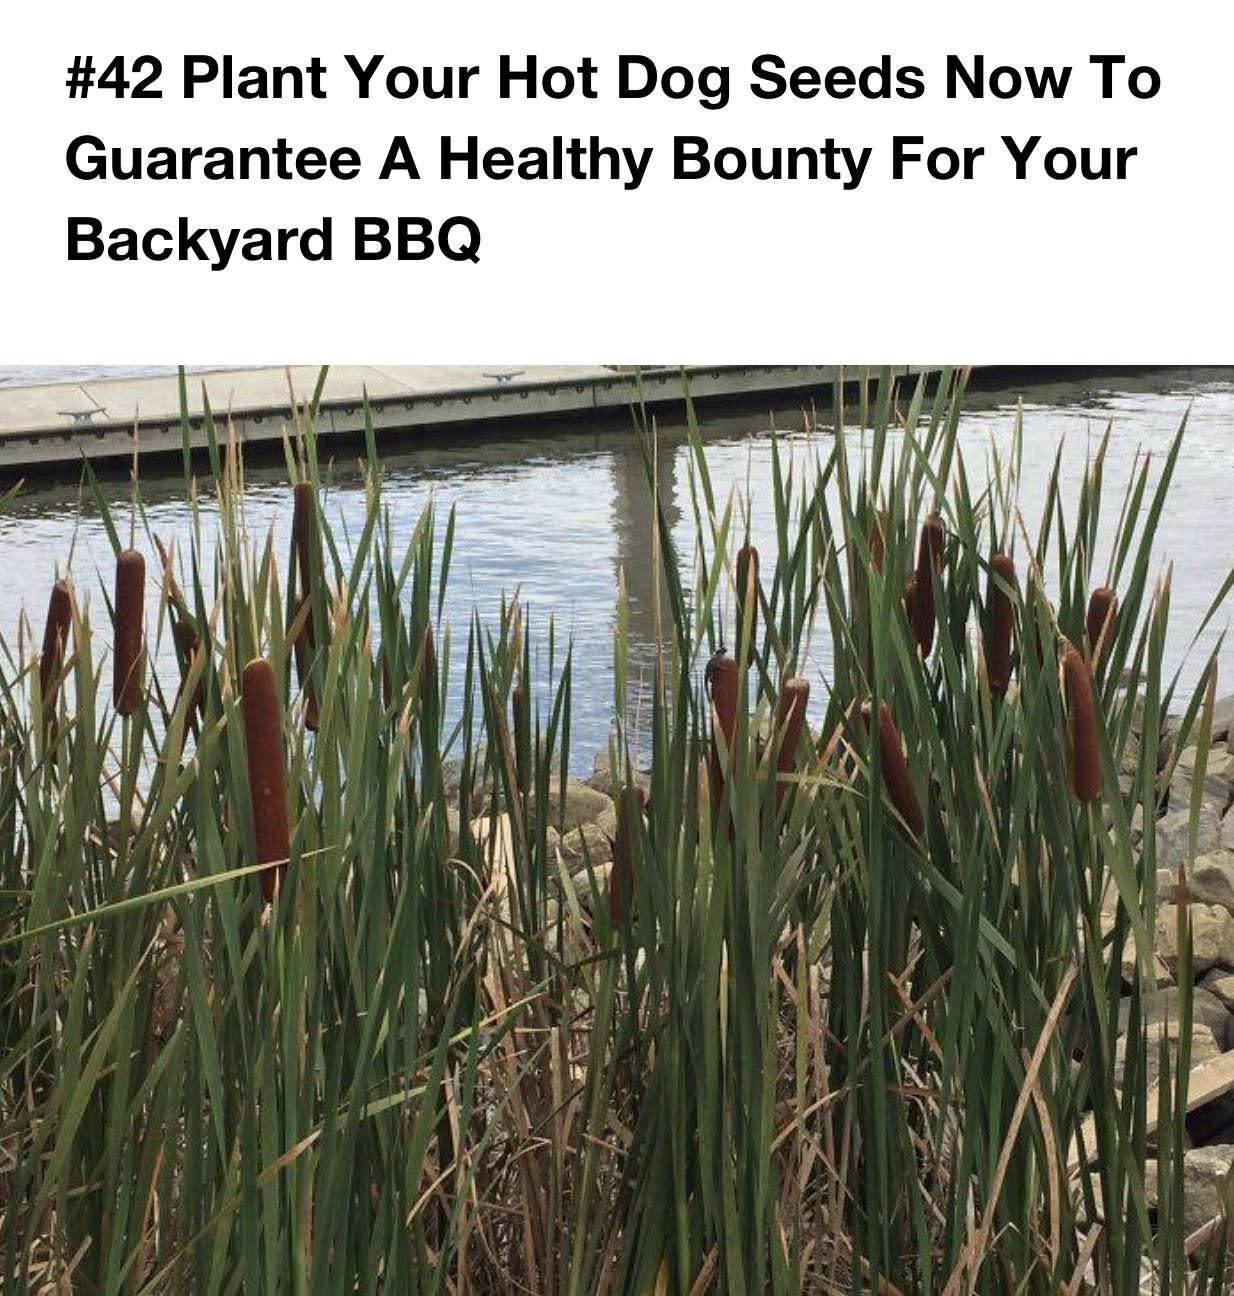 plant your hotdog seeds - Plant Your Hot Dog Seeds Now To Guarantee A Healthy Bounty For Your Backyard Bbq